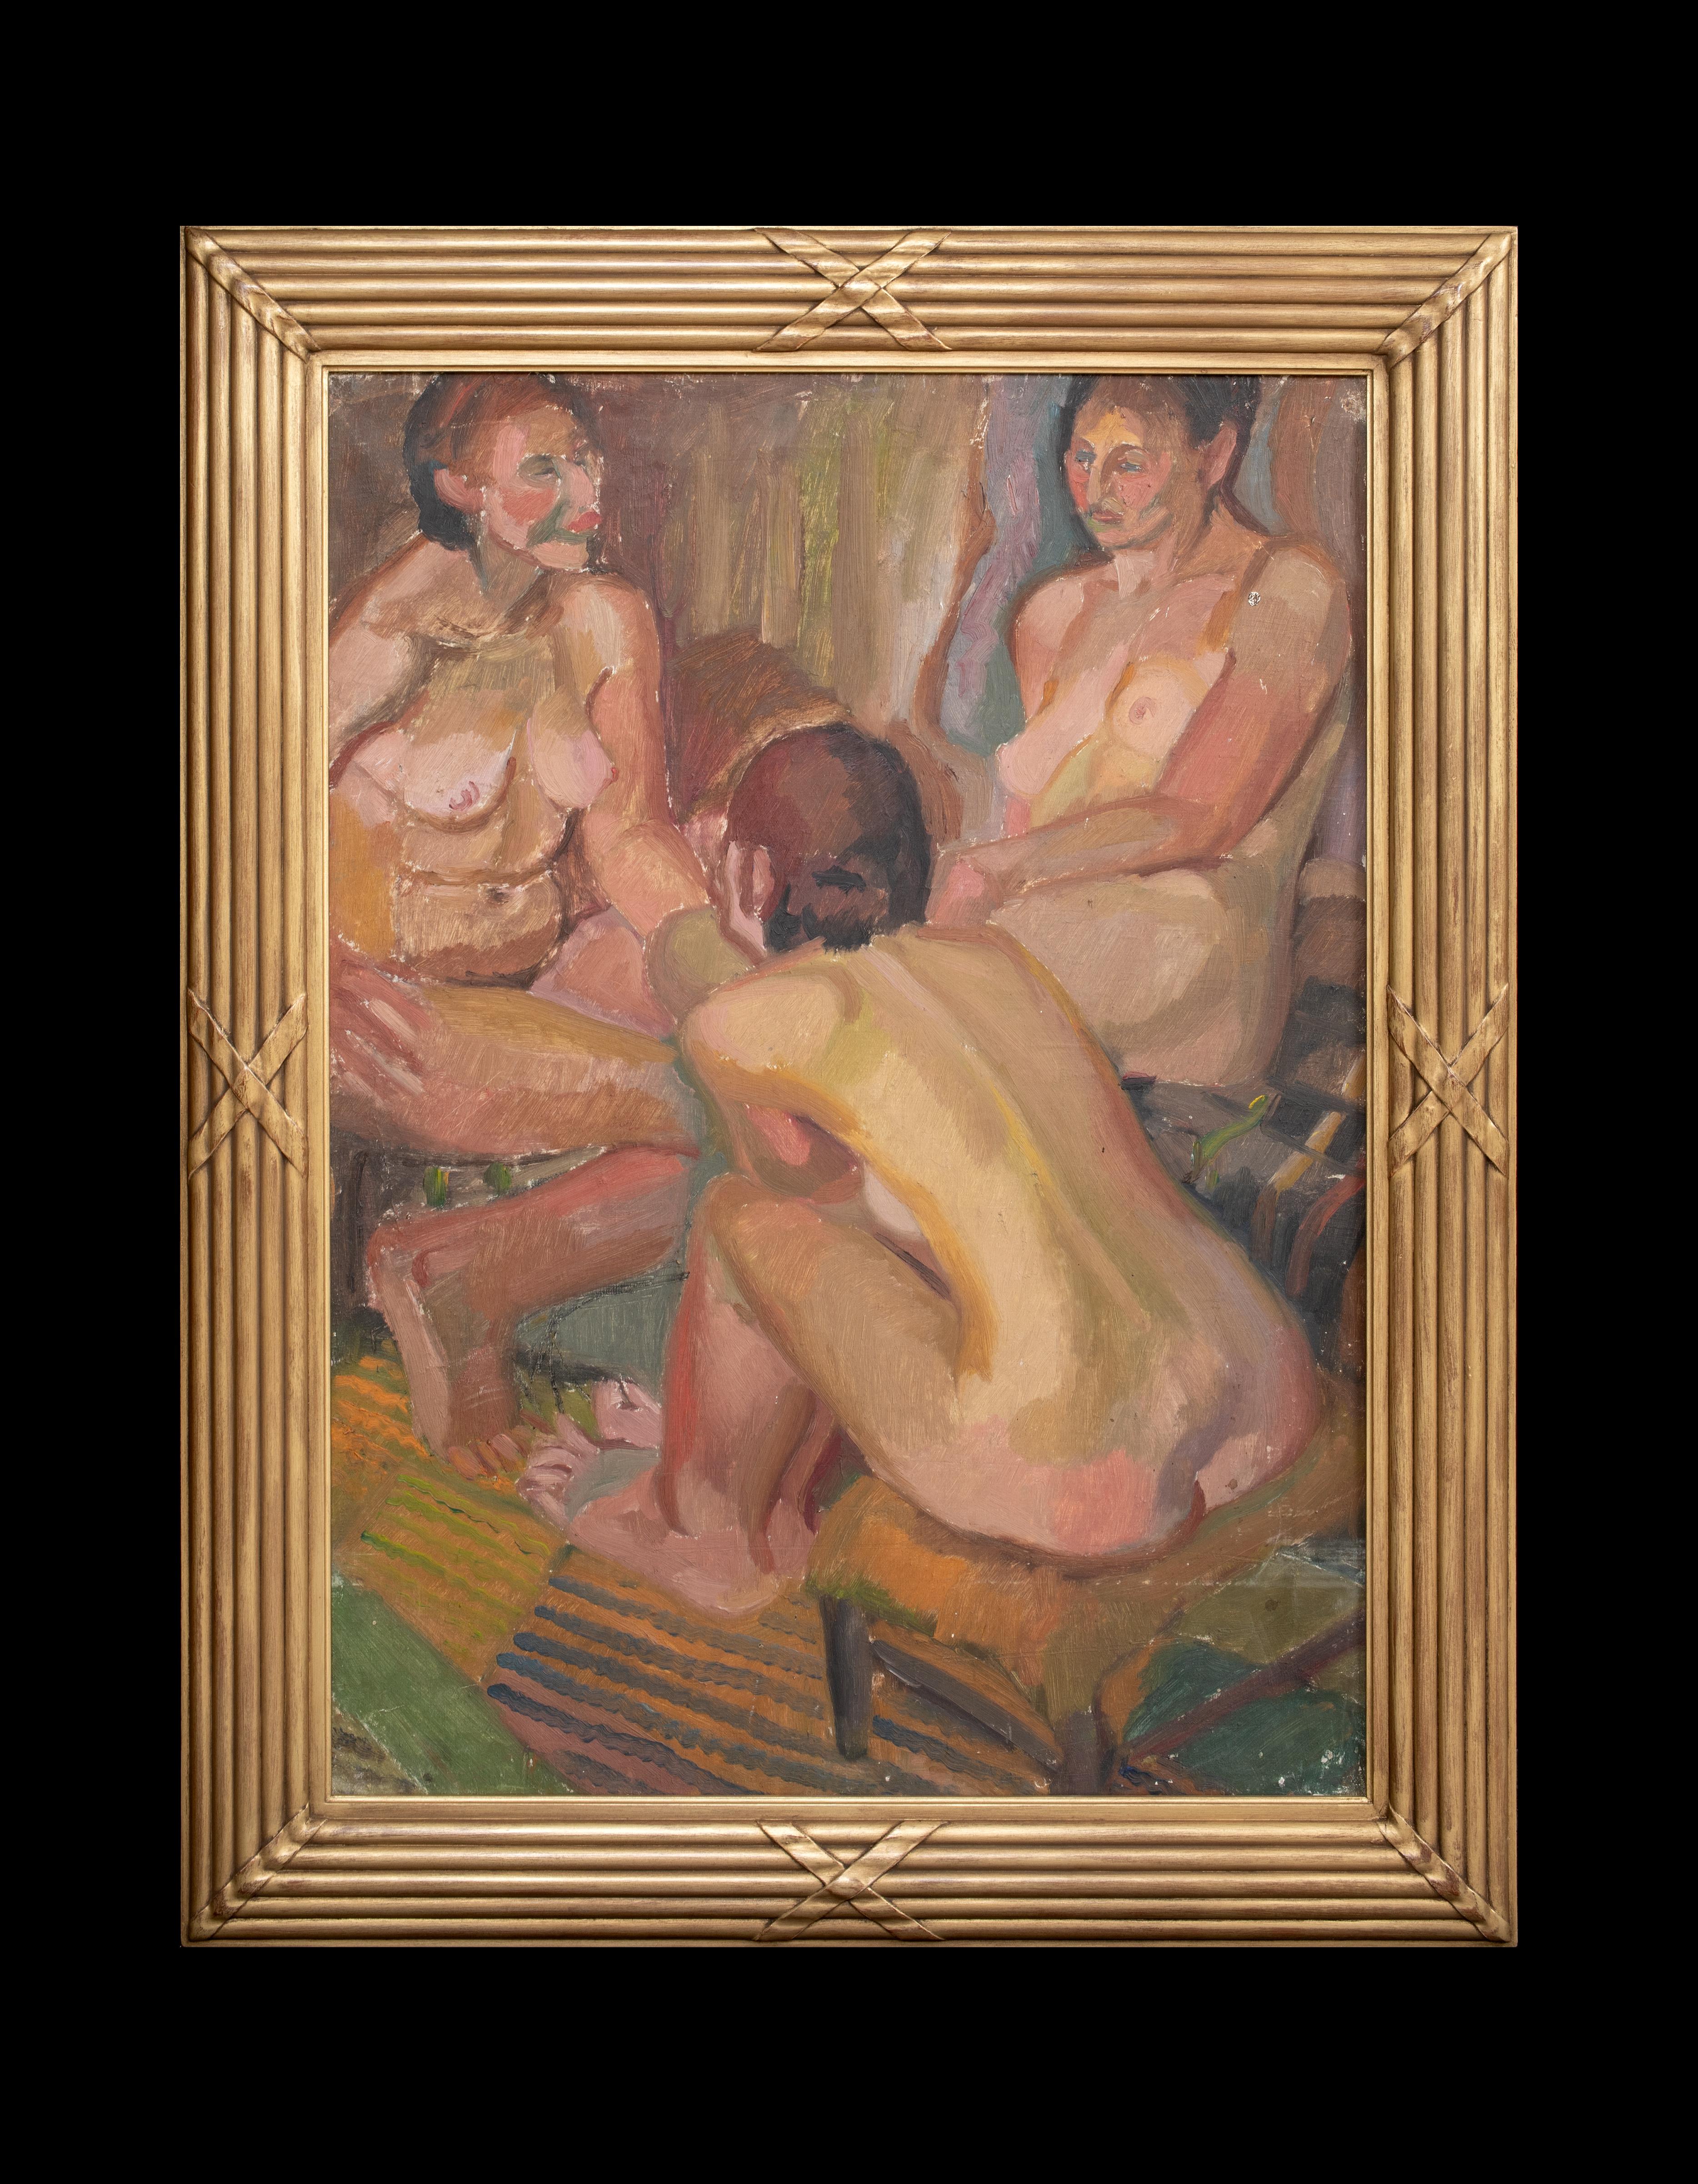 Three Nudes, early 20th Century 

by Harry Barr (1896-1987)

Large early 20th Century portrait of three nudes, oil on canvas by Harry Barr. Excellent quality and condition example of the artists work presented in a gilt reed and cross band